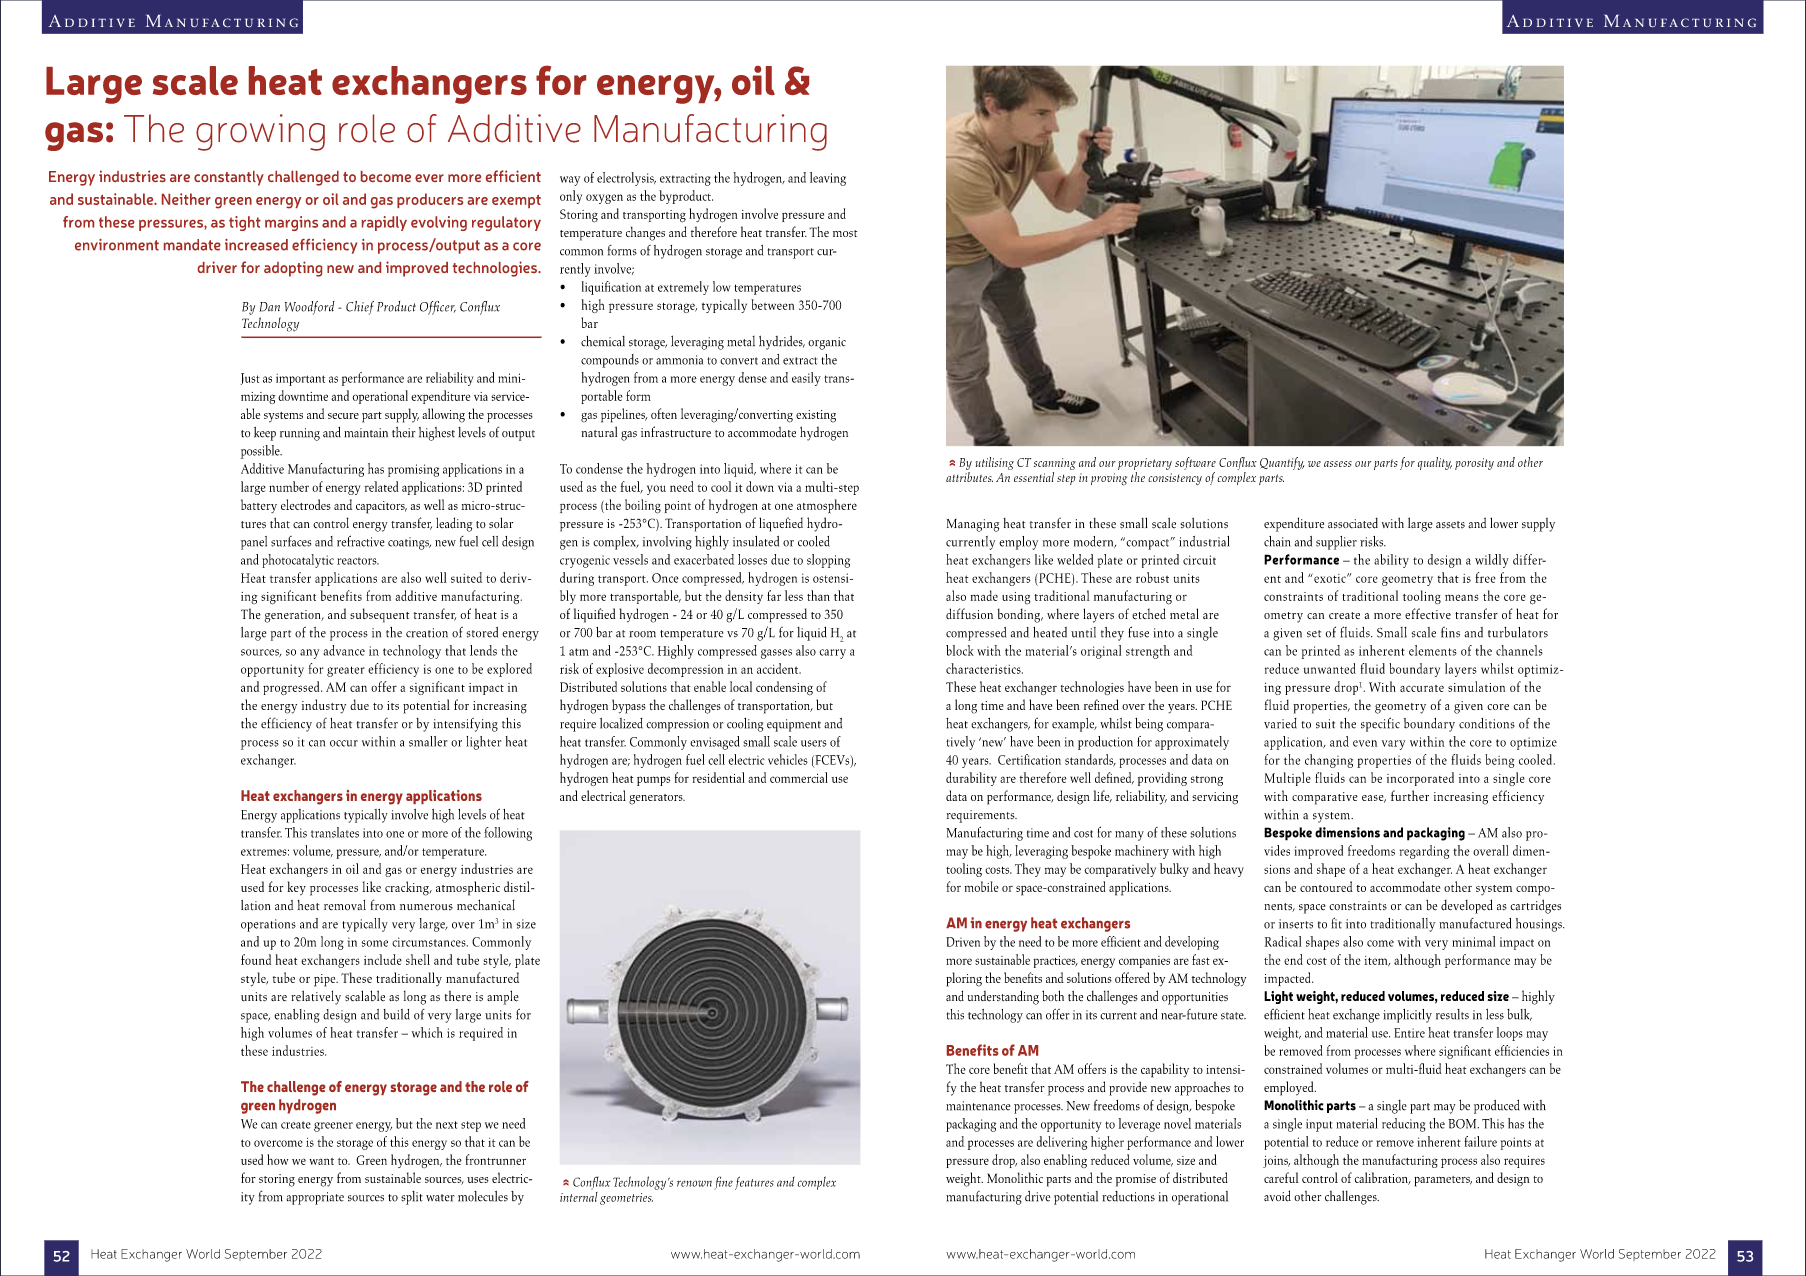 Large scale heat exchangers for Energy, Oil & Gas: the growing role of Additive Manufacturing 